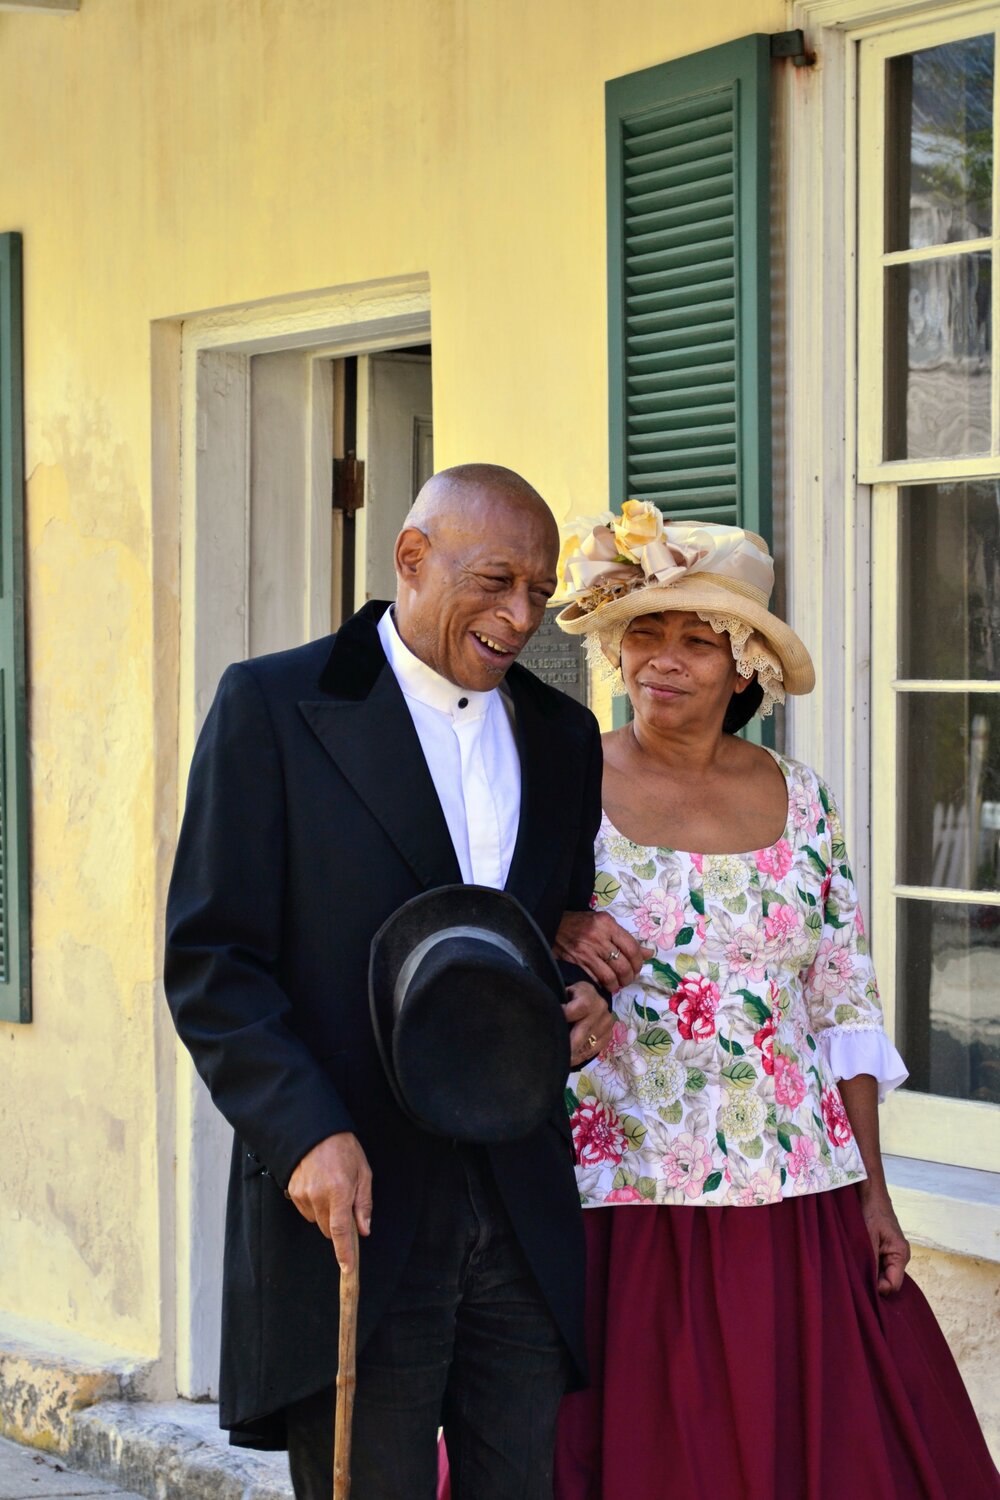 “I Lived Here, As Well … The Story Continues” tells the story of African-Americans who lived in the Ximenez-Fatio House.